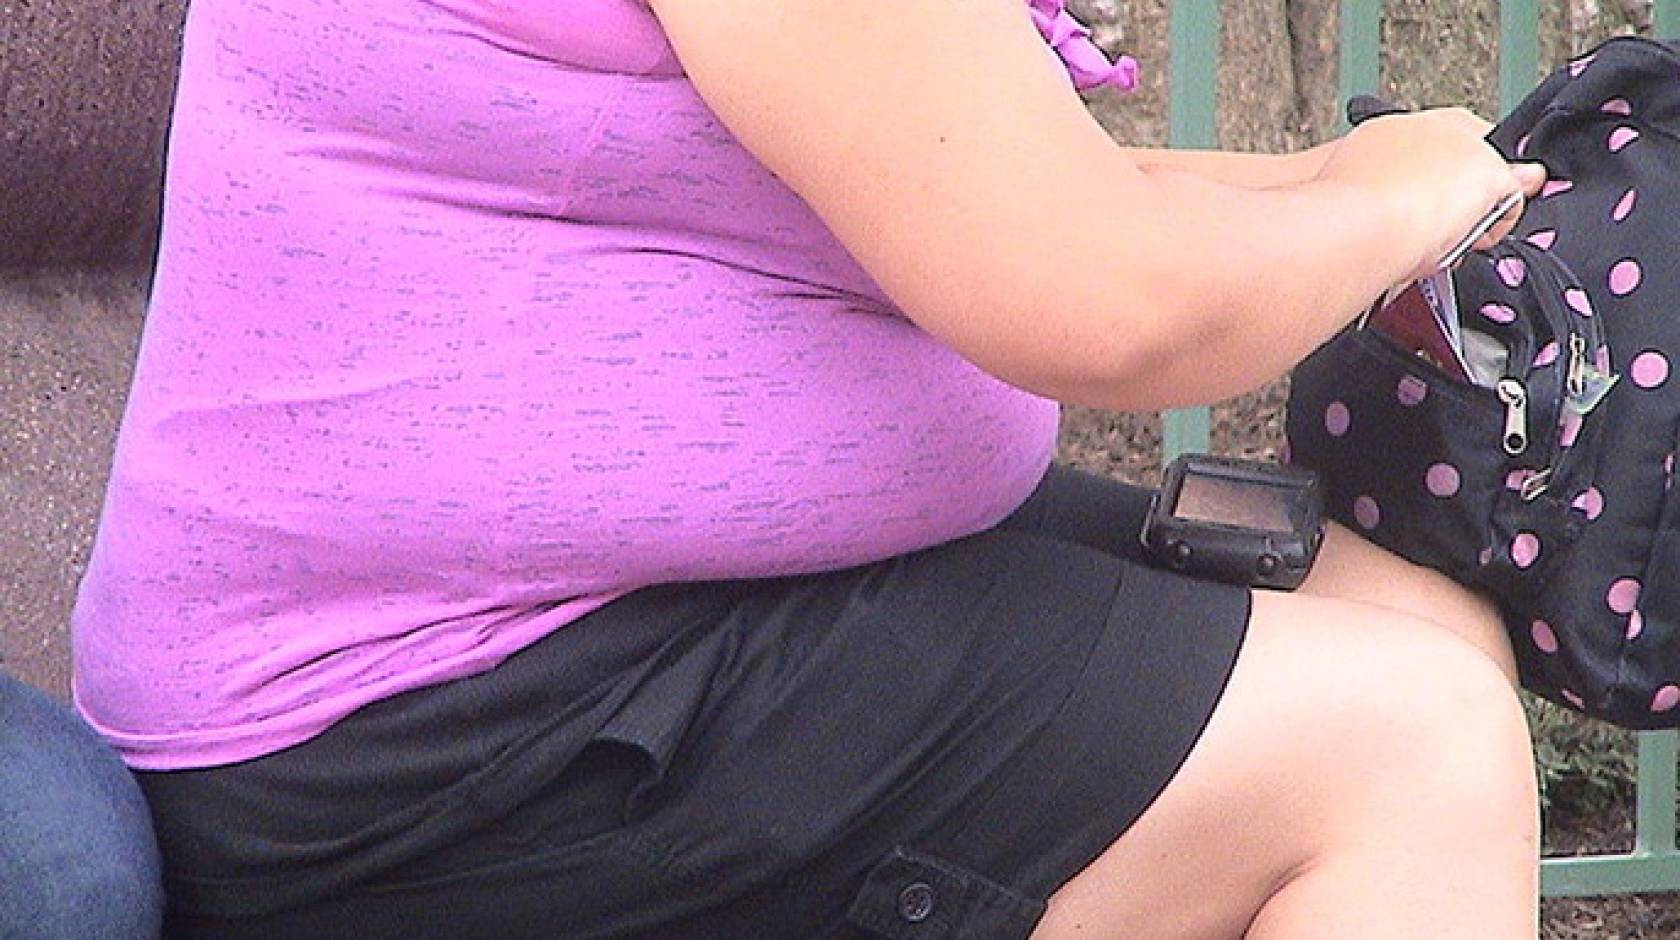 More than two in three adults in the United States are considered overweight or obese.